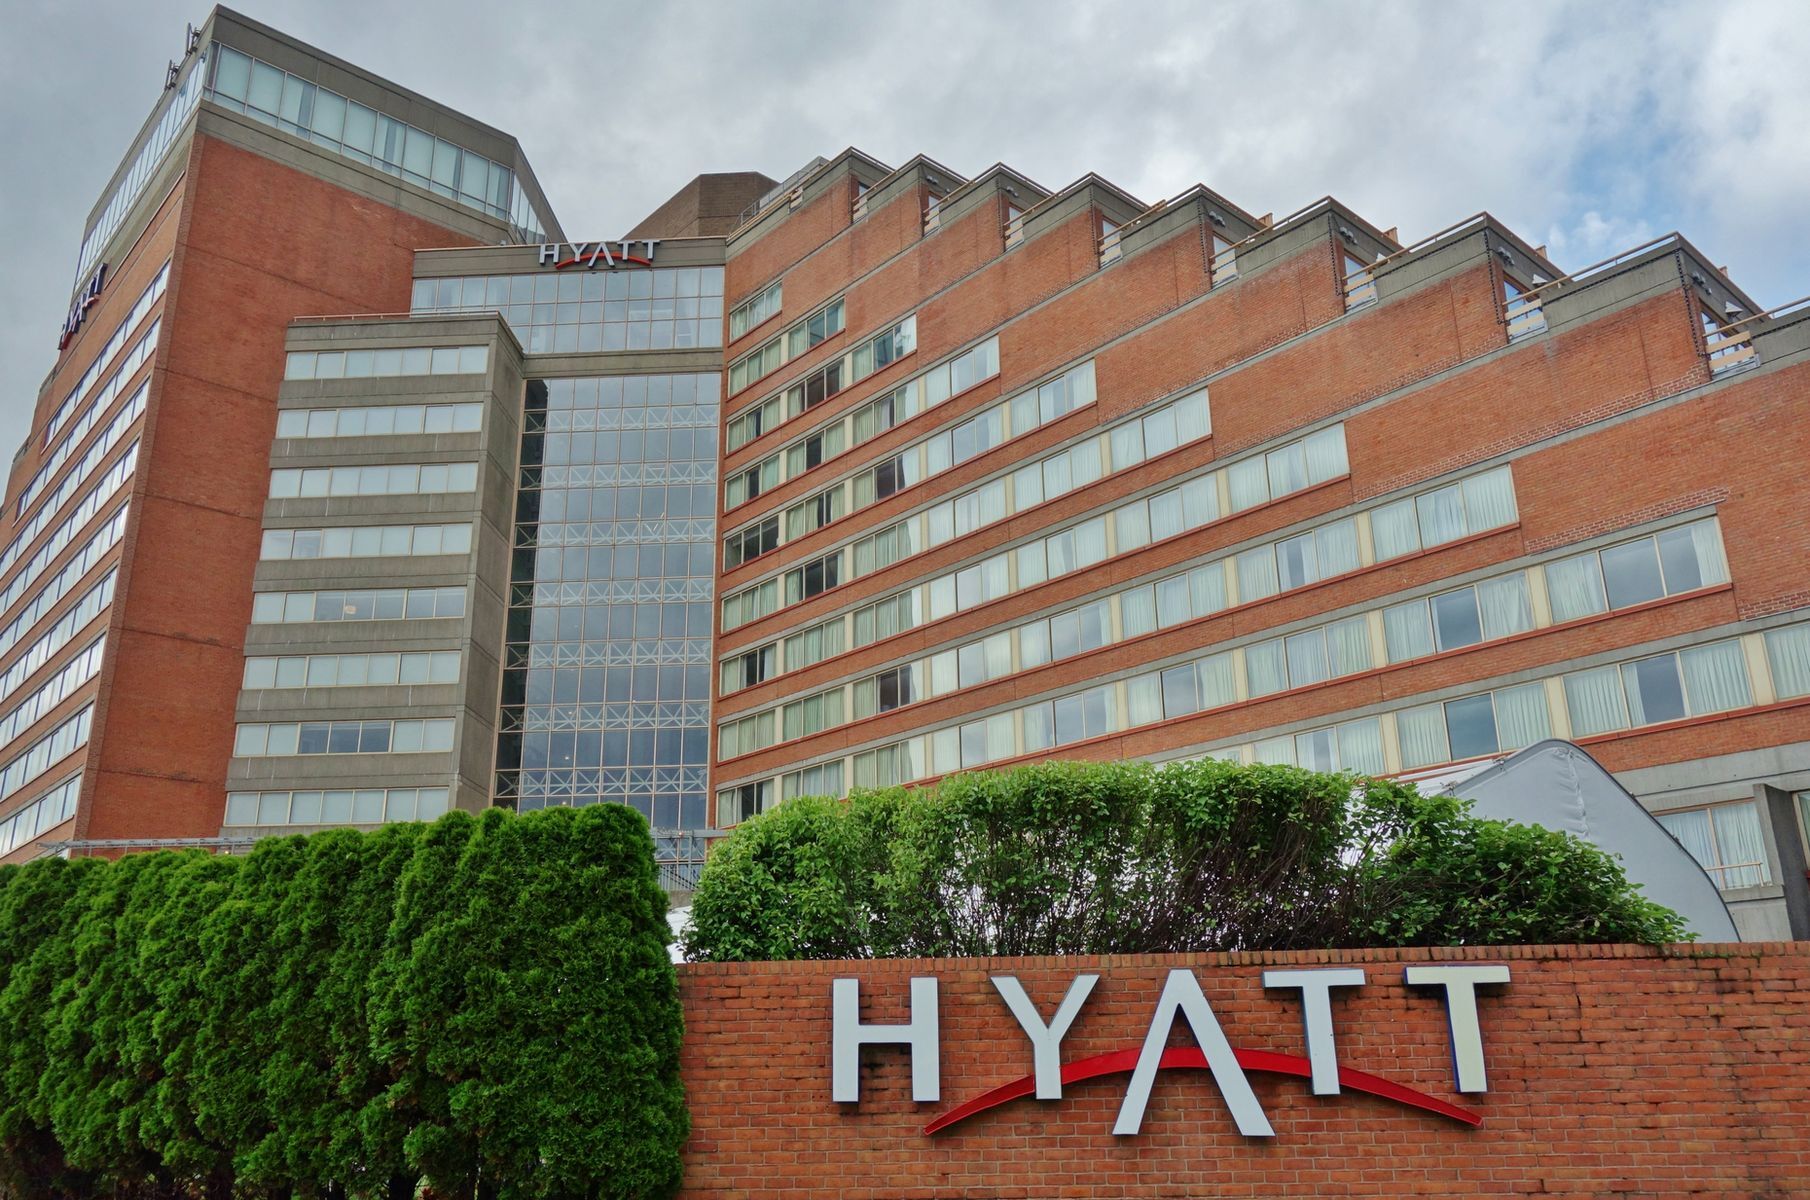 <p>Hyatt Hotels Corporation is a multinational chain that got started as <a href="https://about.hyatt.com/en/hyatthistory.html#:~:text=OUR%20story,the%20Los%20Angeles%20International%20Airport.">a motel near the Los Angeles airport</a>. Now the company has <a href="https://investors.hyatt.com/investor-relations/our-company/default.aspx" rel="noreferrer noopener">1,300 hotels and all-inclusive properties</a> in 76 countries. The hotel brand is perhaps best known for its <a href="https://world.hyatt.com/content/gp/en/program-overview.html">loyalty program</a>, which is considered to be more extensive and rewarding than that of most of its direct competitors. </p>